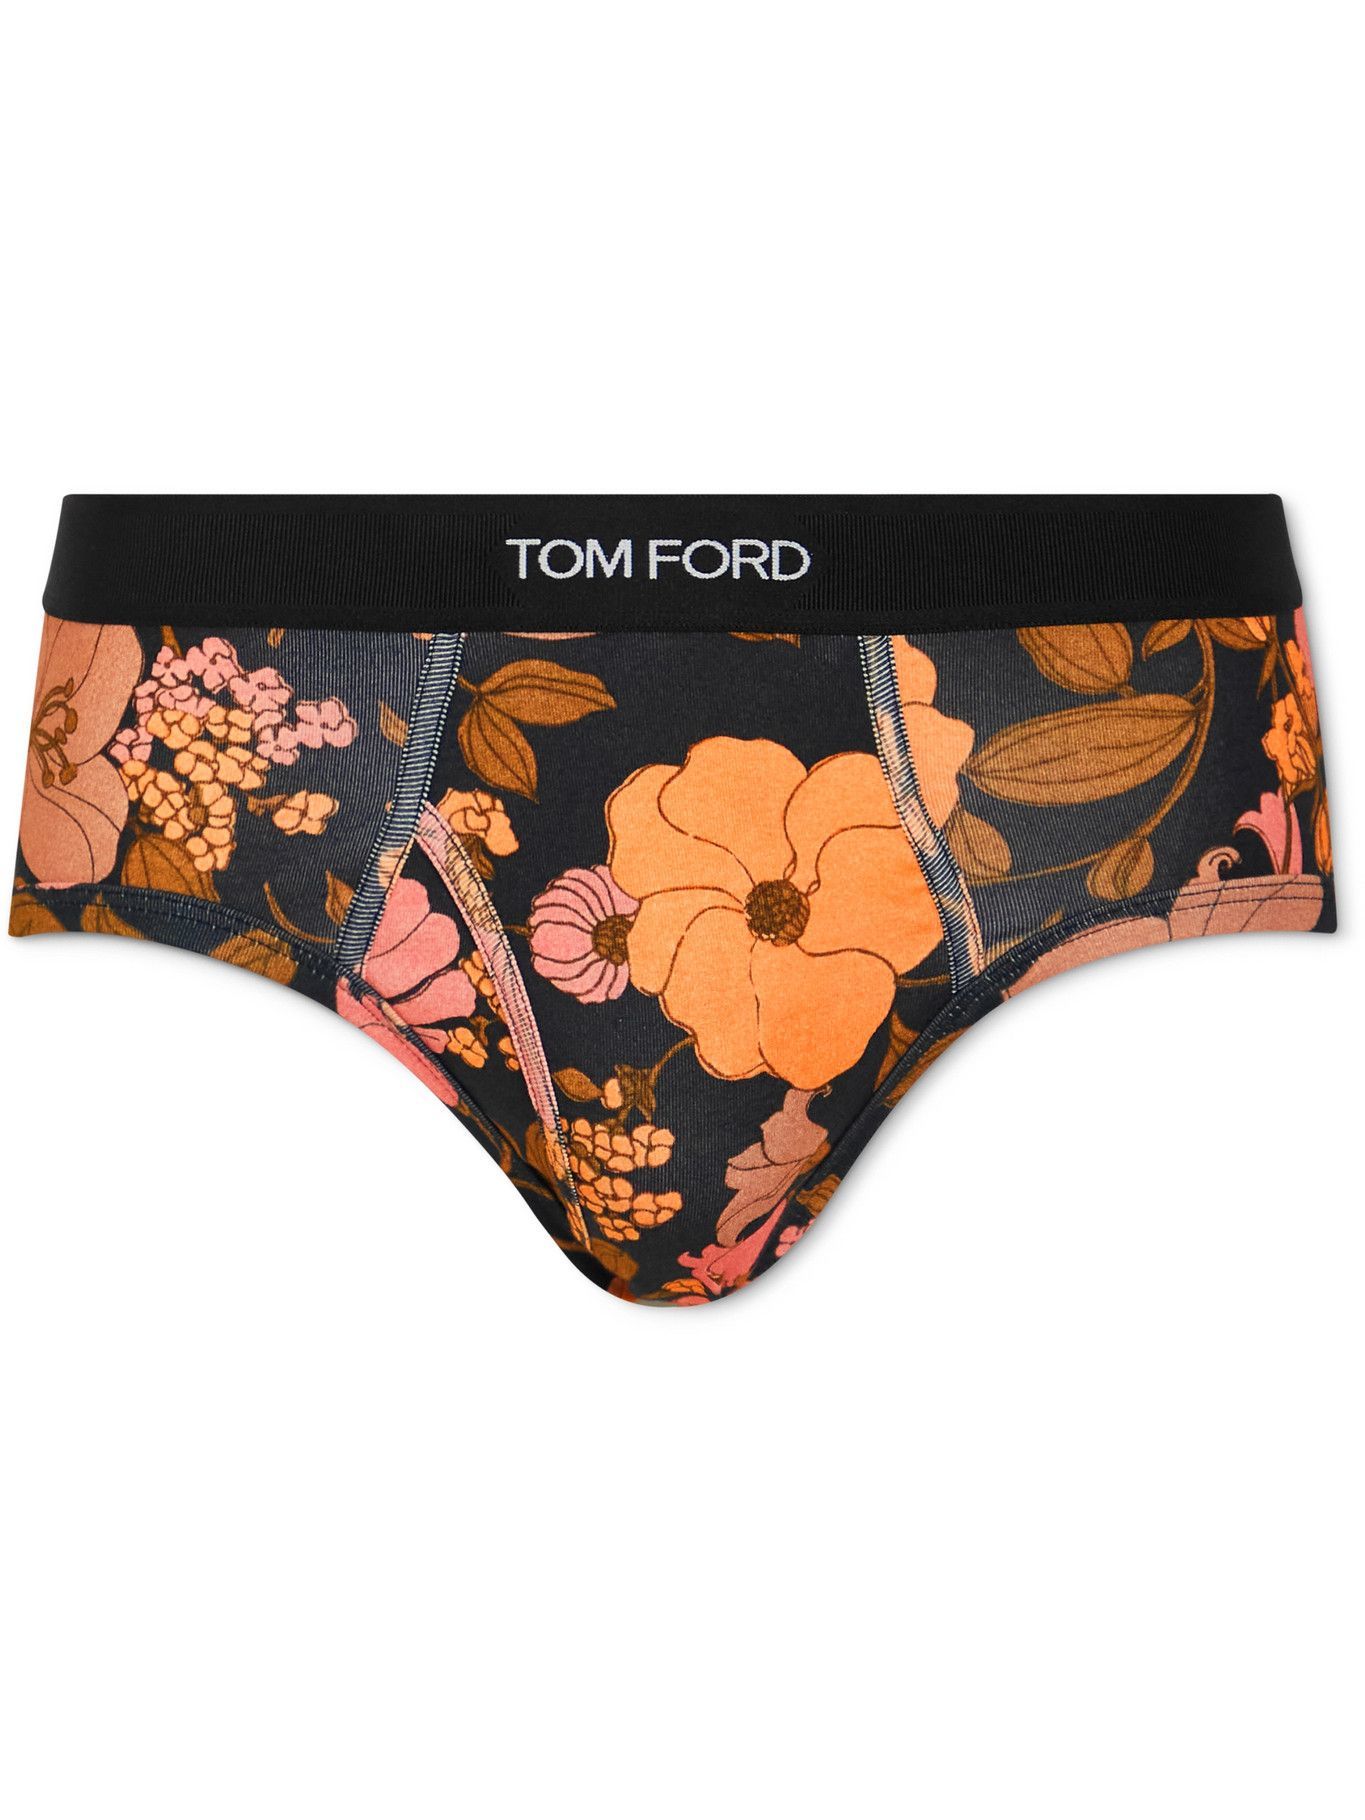 TOM FORD - Floral-Print Stretch-Cotton Briefs - Pink TOM FORD